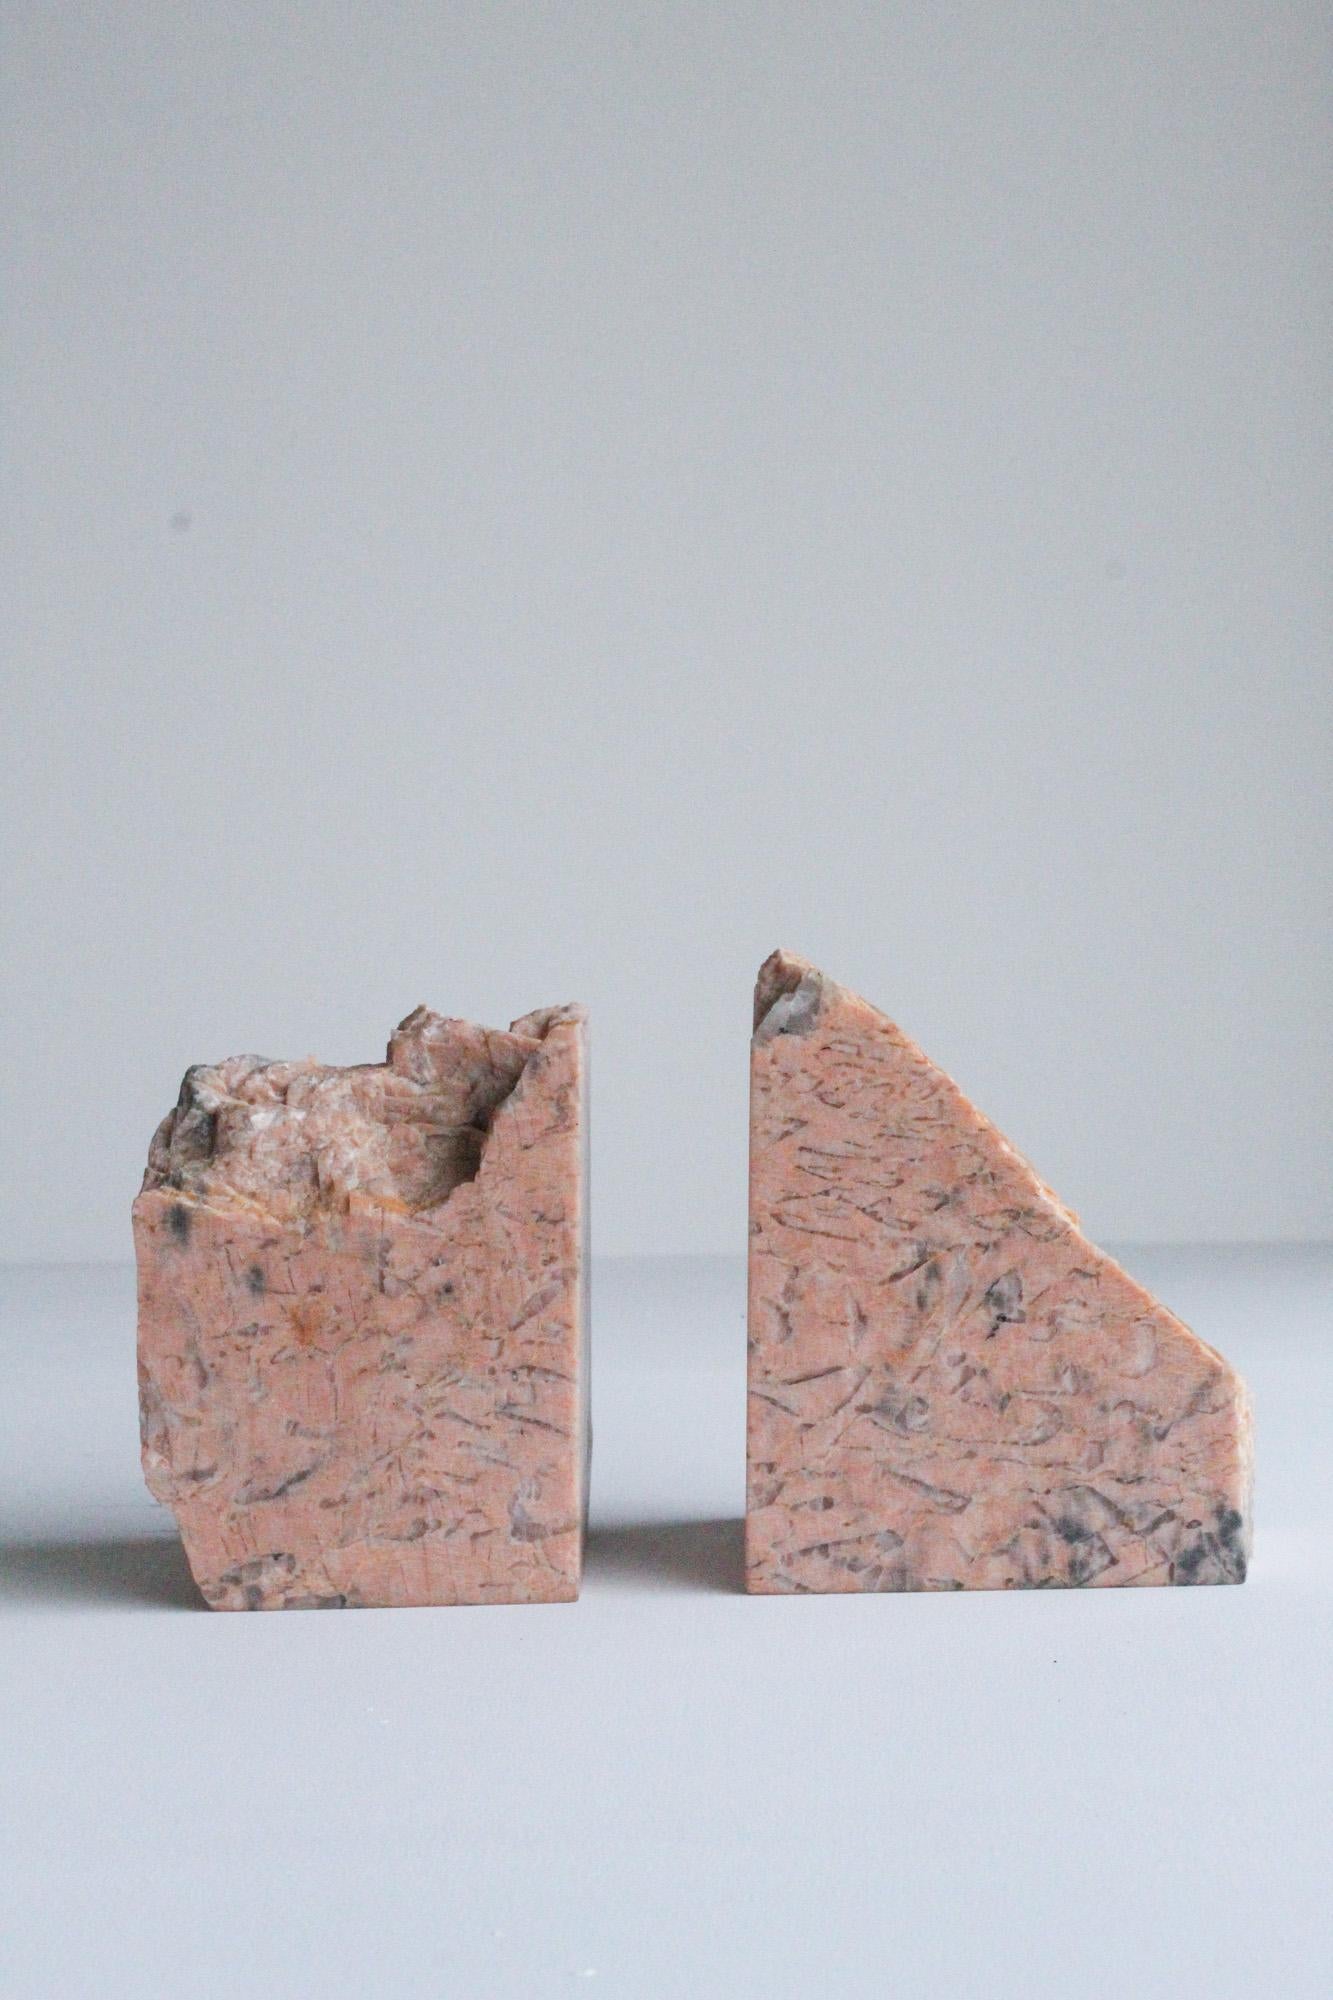 A pair of stunning organic modern bookends crafted out of pink natural marble featuring a beautiful design making them a perfect addition to a home or office space. Ettore Sottsass and Gaetano Pesce Books in photos are not included and are just for